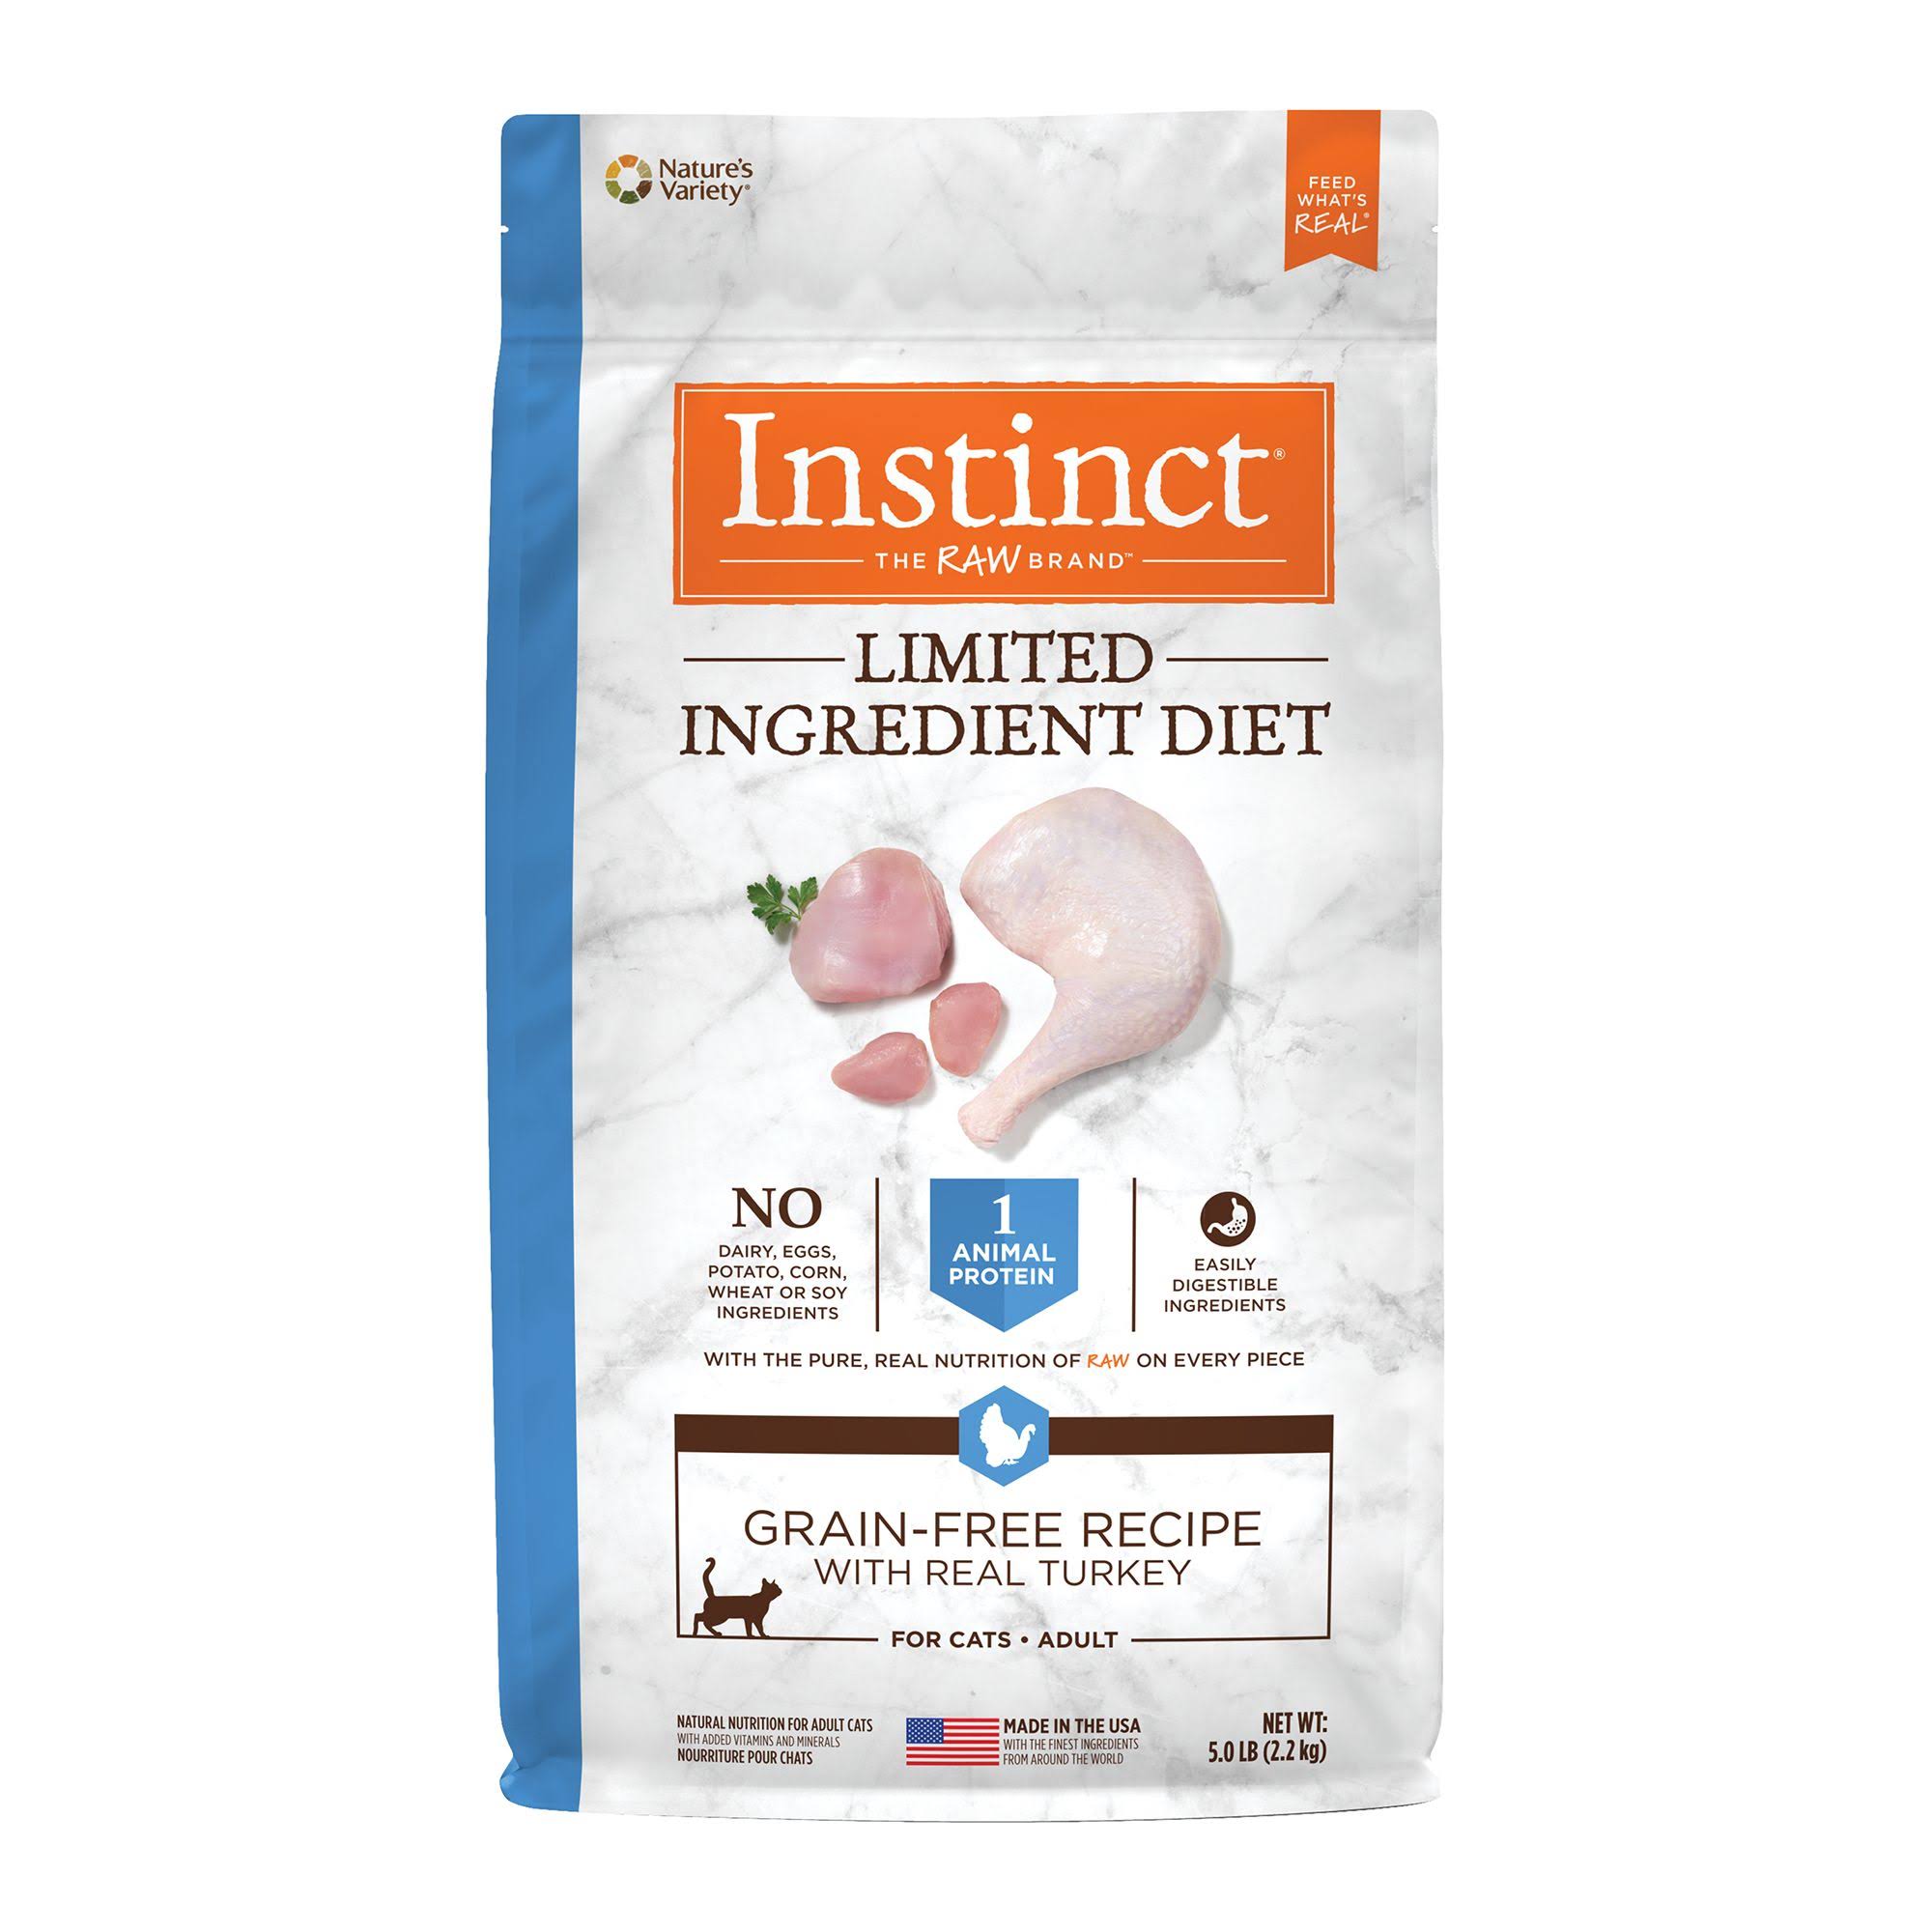 Instinct Limited Ingredient Diet Grain-Free Recipe with Real Turkey for Cats